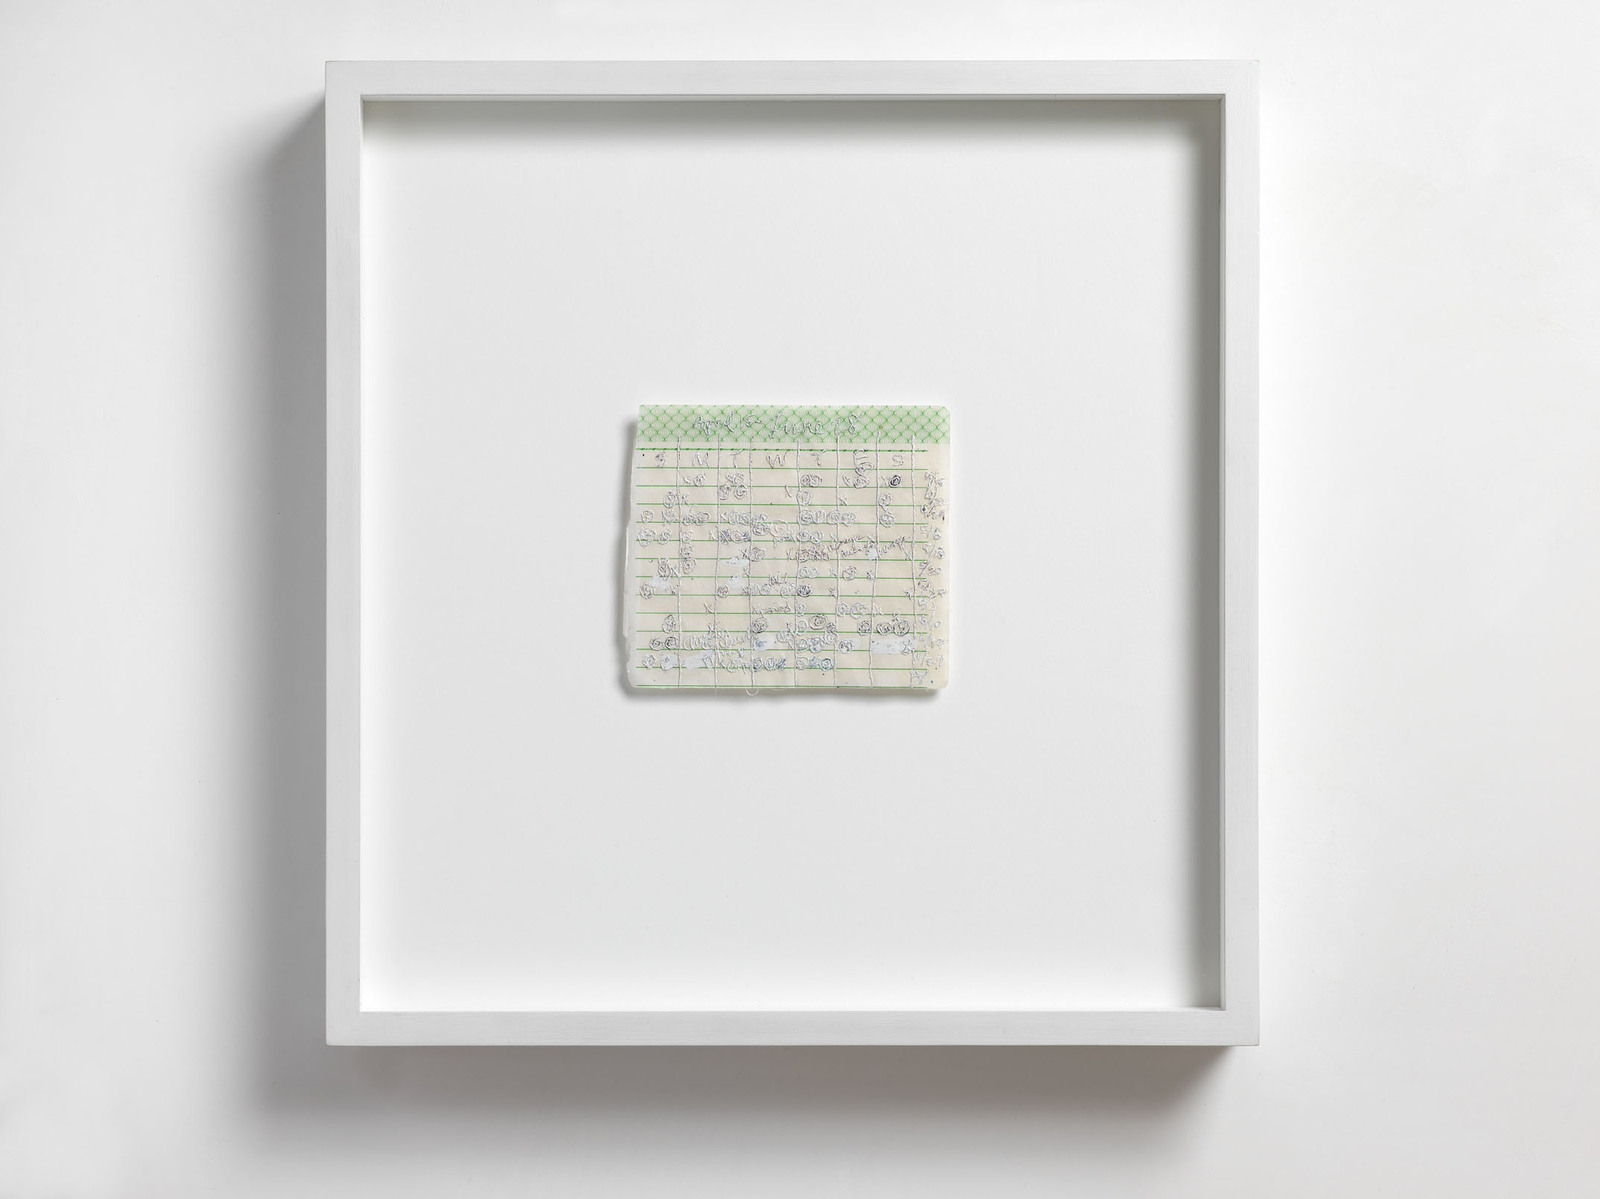 Nicola Ginzel  Selected Flatwork hand written schedule, embroidered with thread by hand